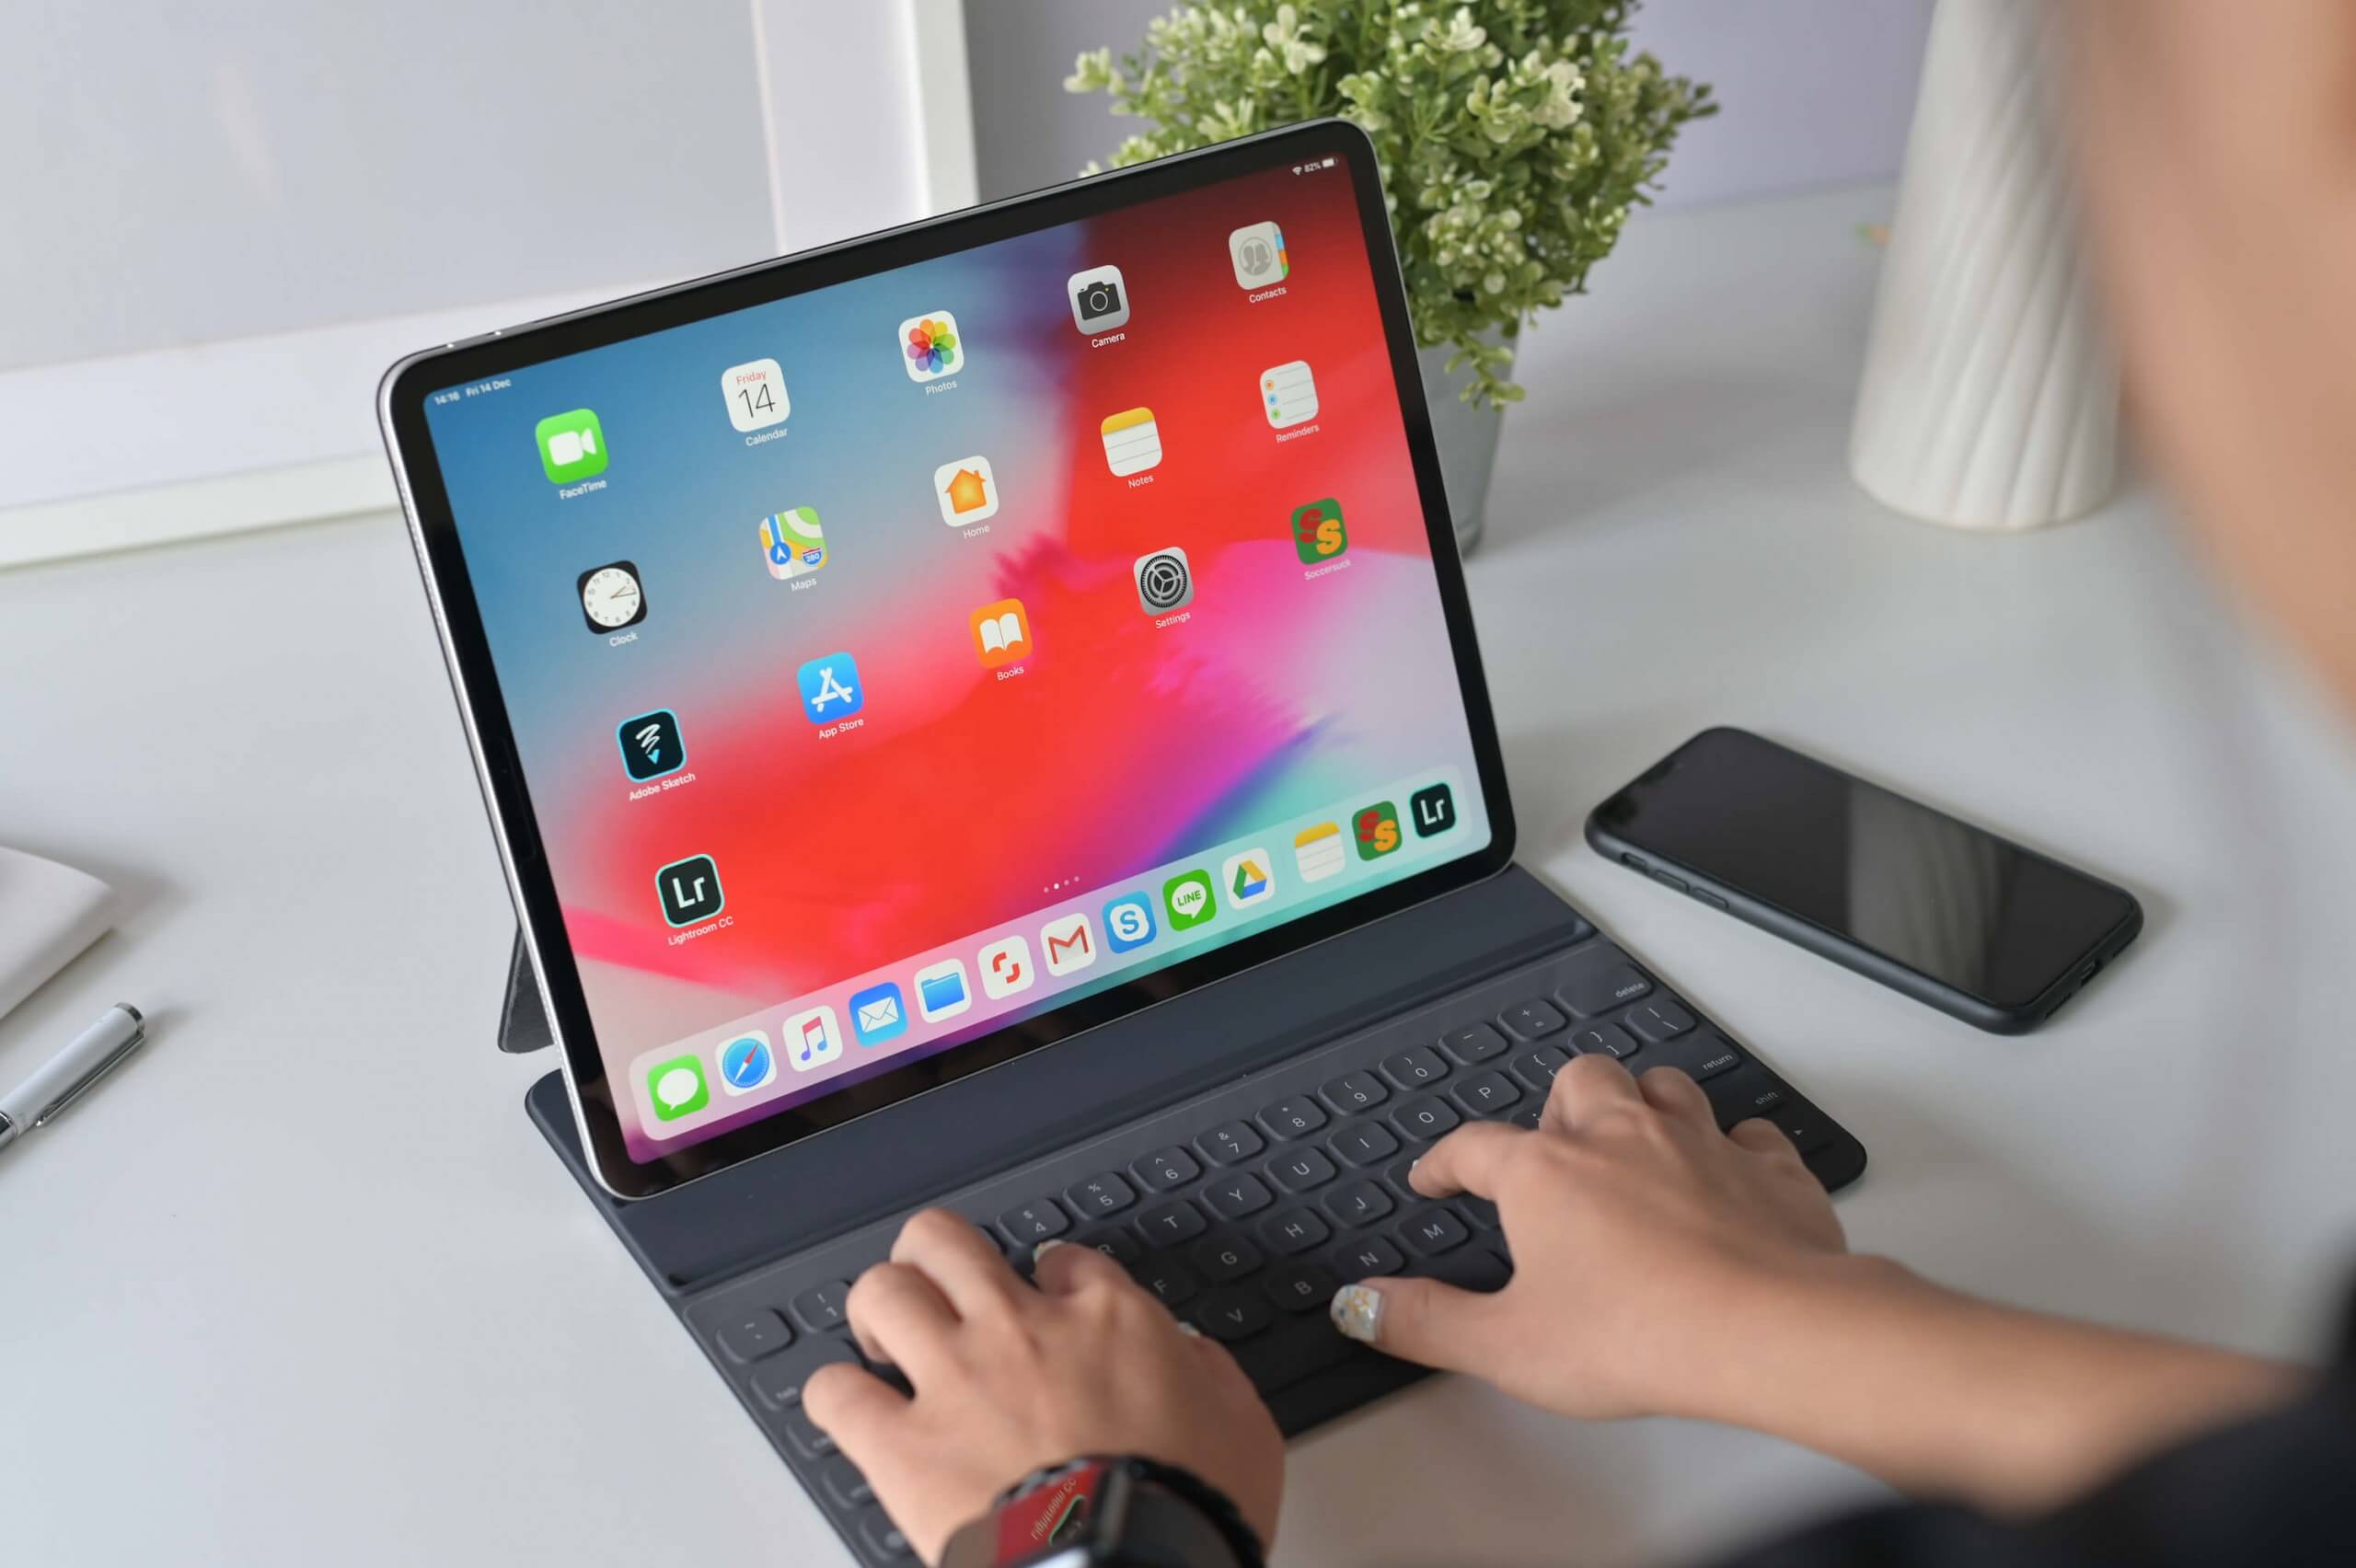 Apple reportedly has a new keyboard designed for iPads featuring a trackpad